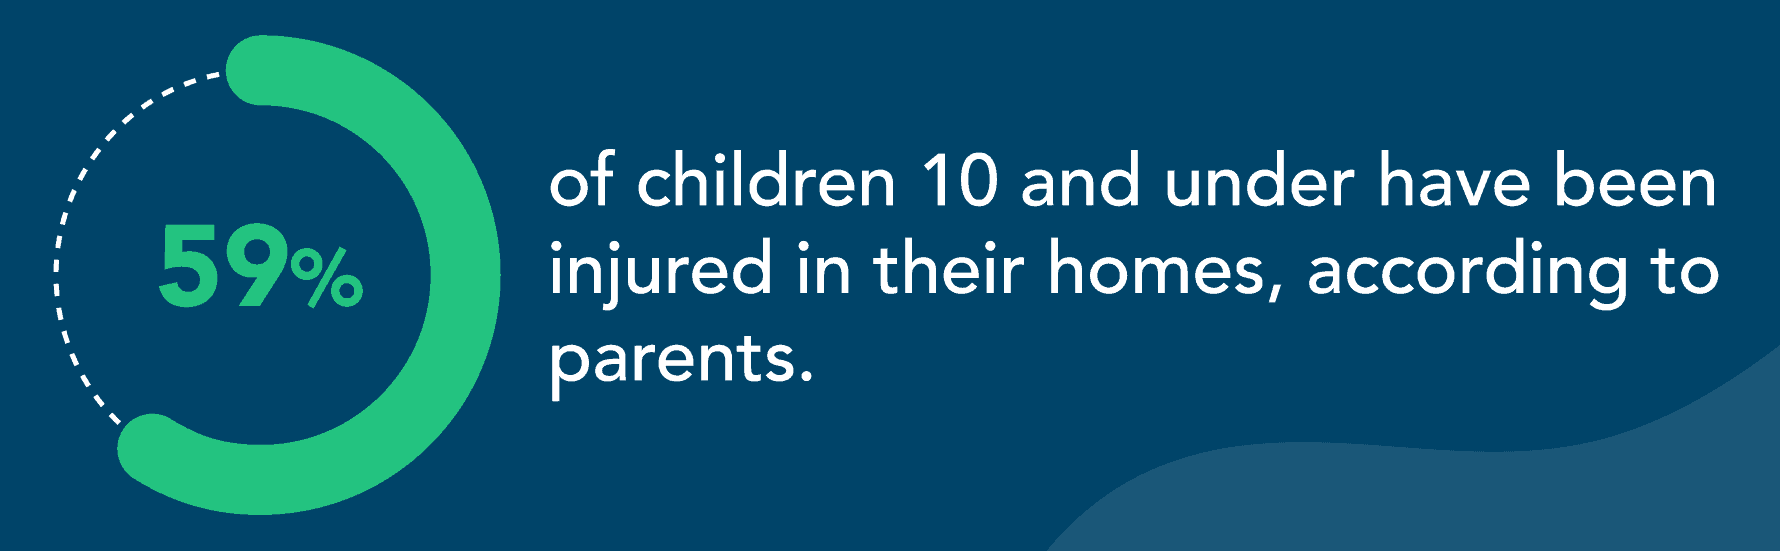 59% of children 10 and under have been injured in their homes, according to parents.